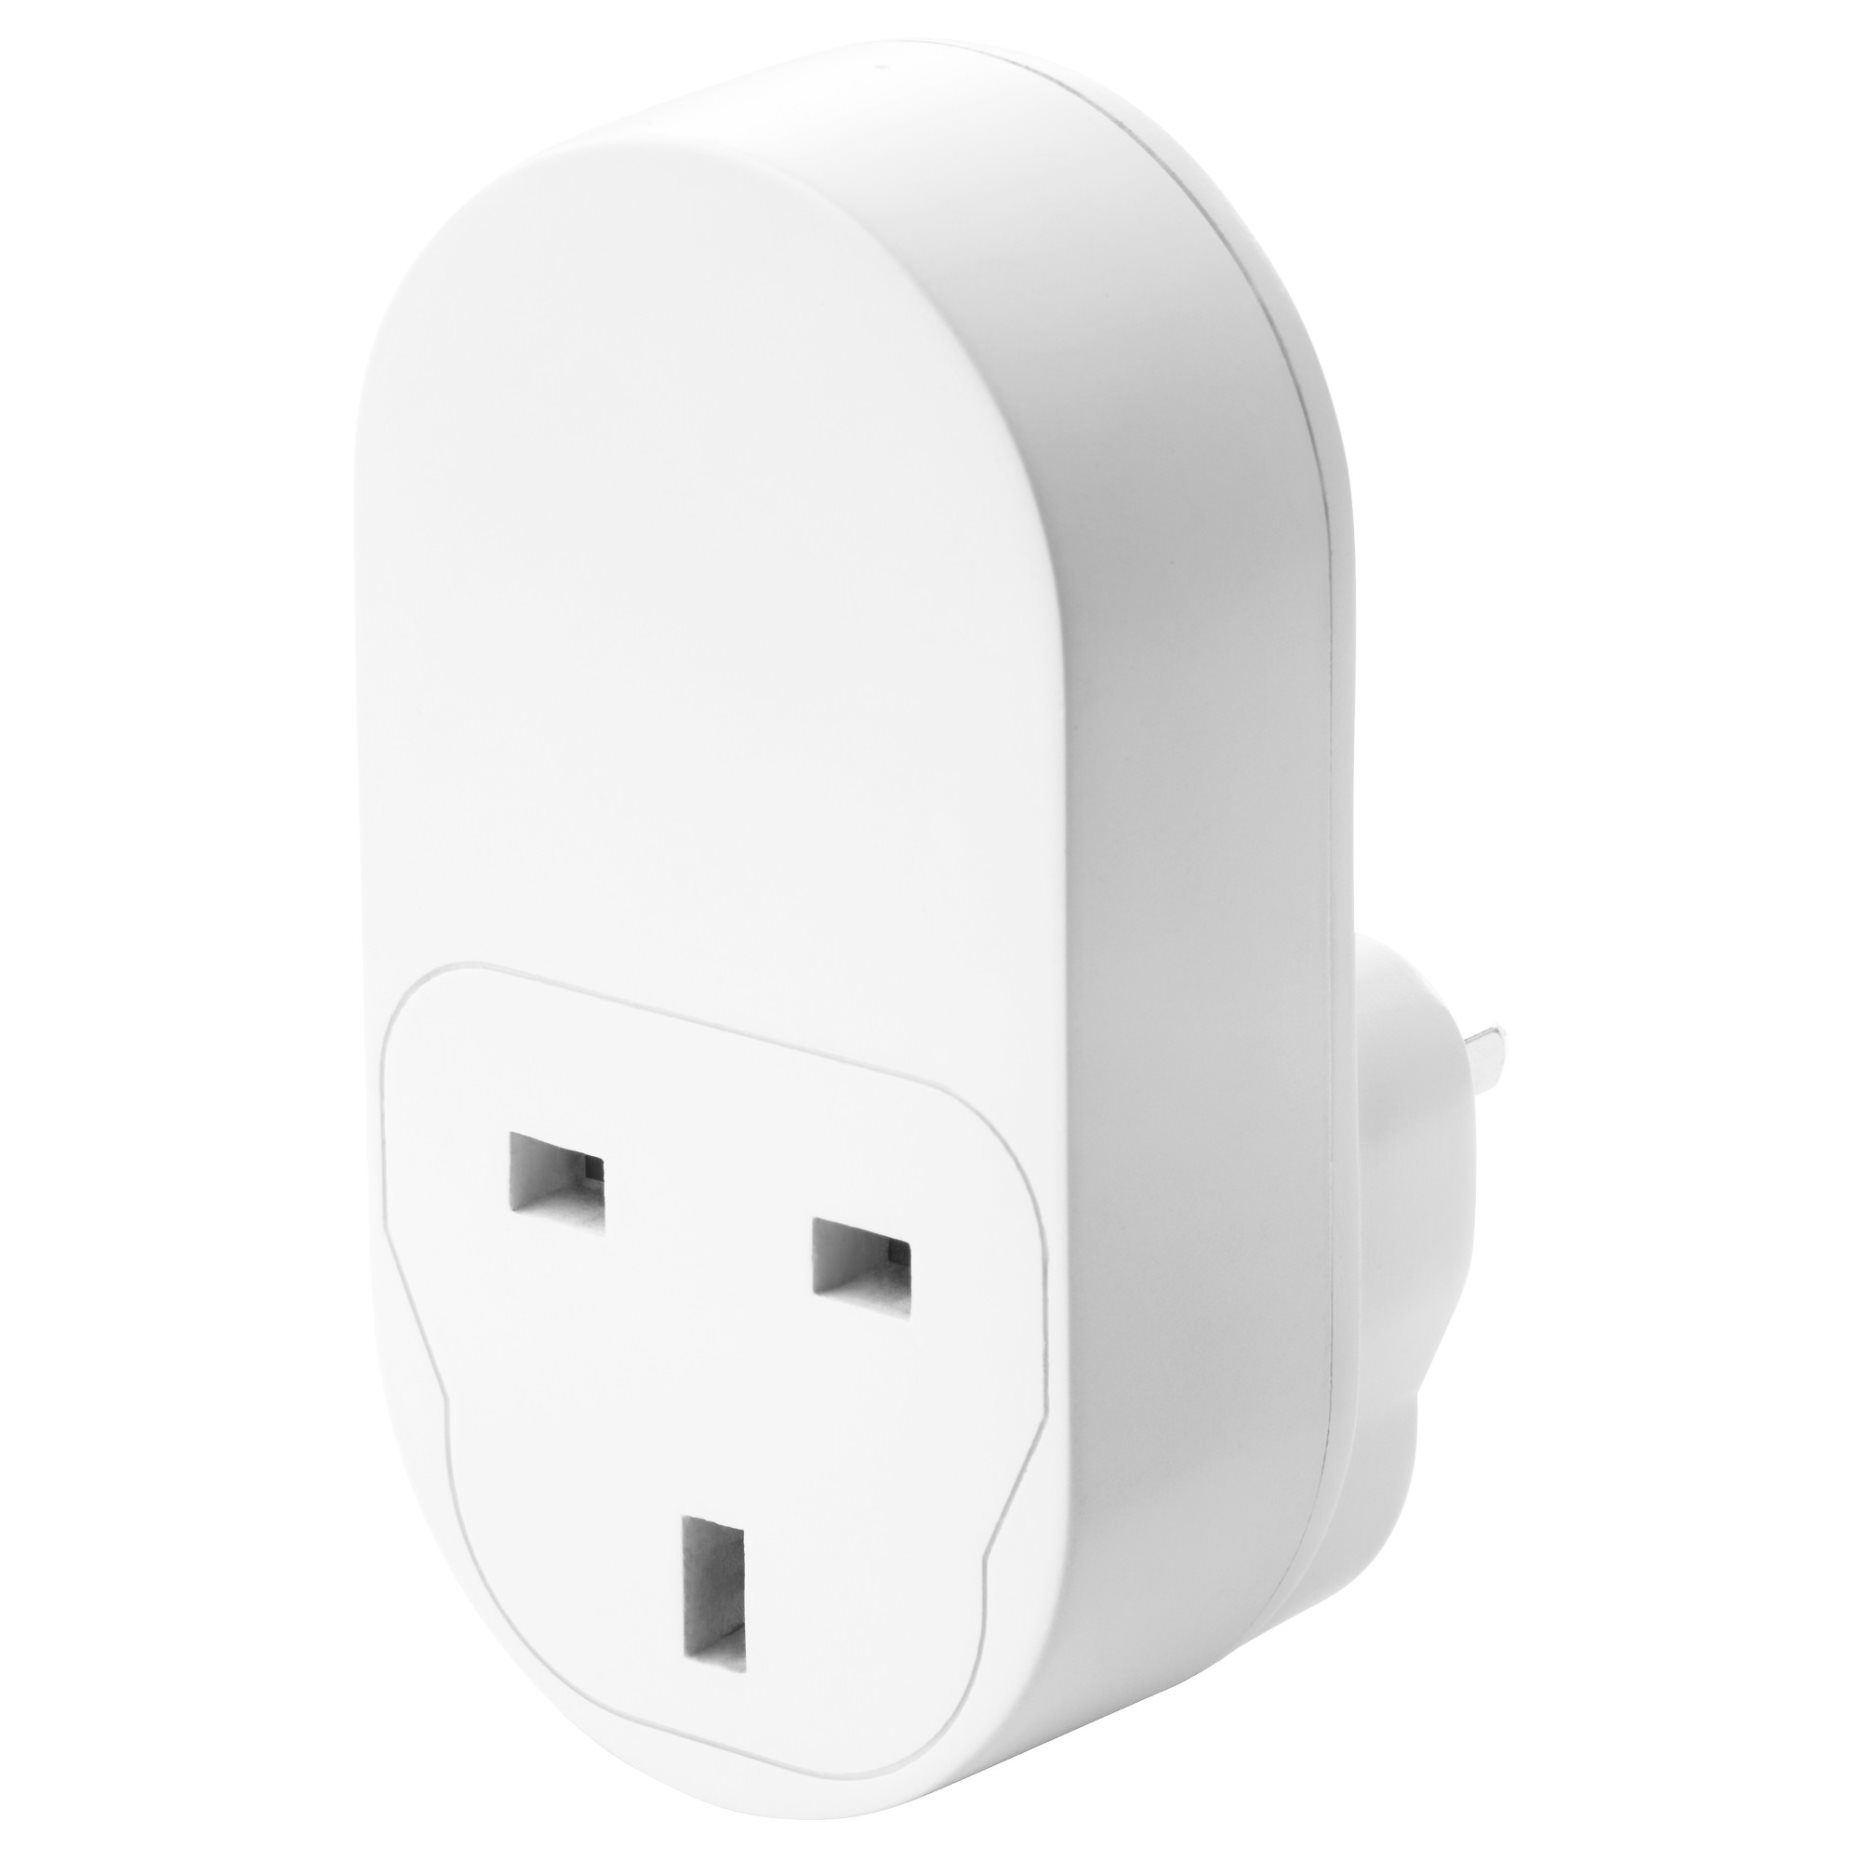 TRÅDFRI, wireless control outlet, 003.644.77